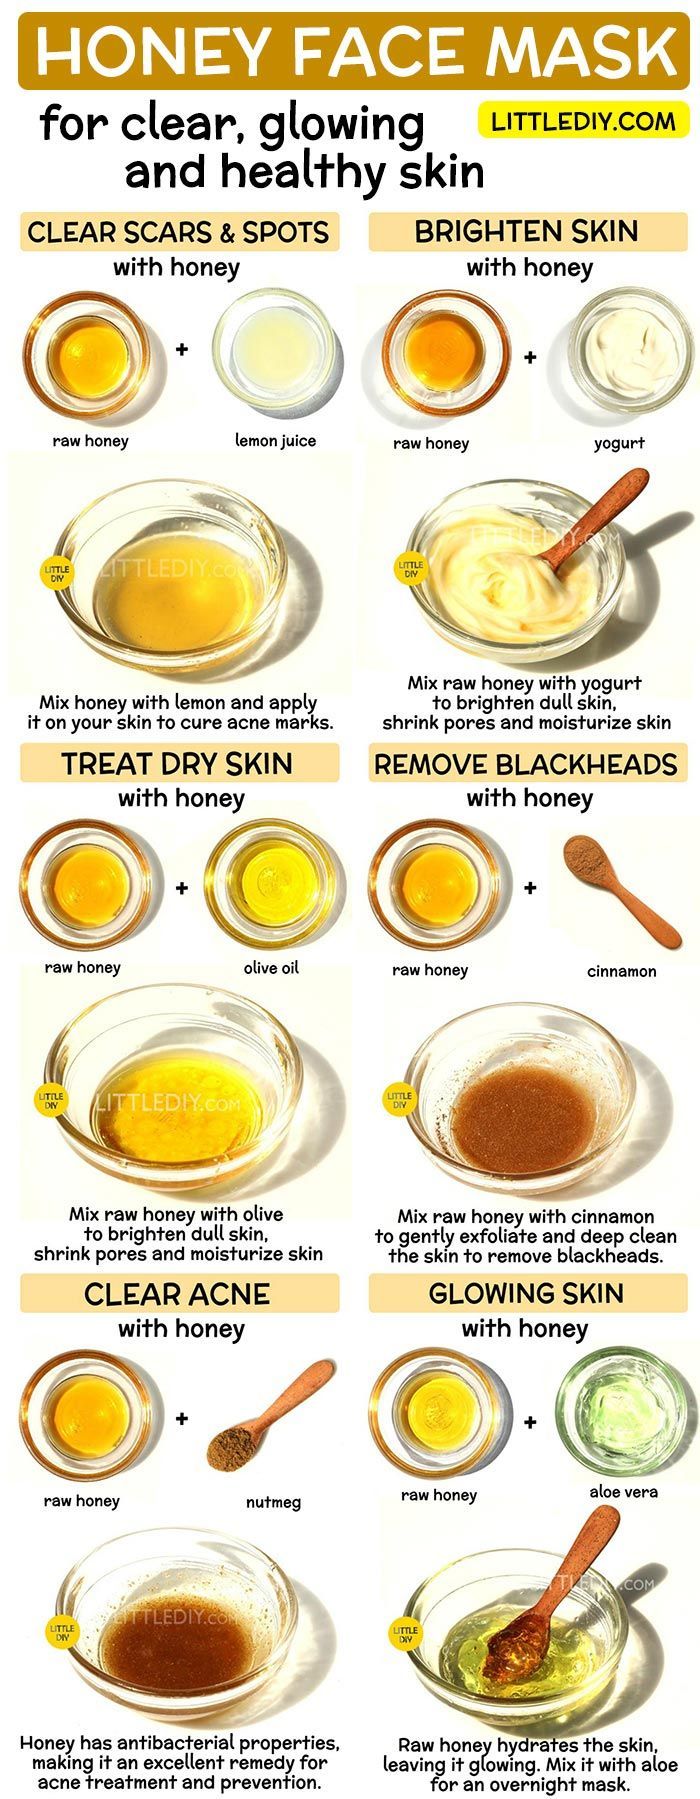 HONEY FACE MASKS for clear, bright and glowing skin - LITTLE DIY - HONEY FACE MASKS for clear, bright and glowing skin - LITTLE DIY -   beauty Care face